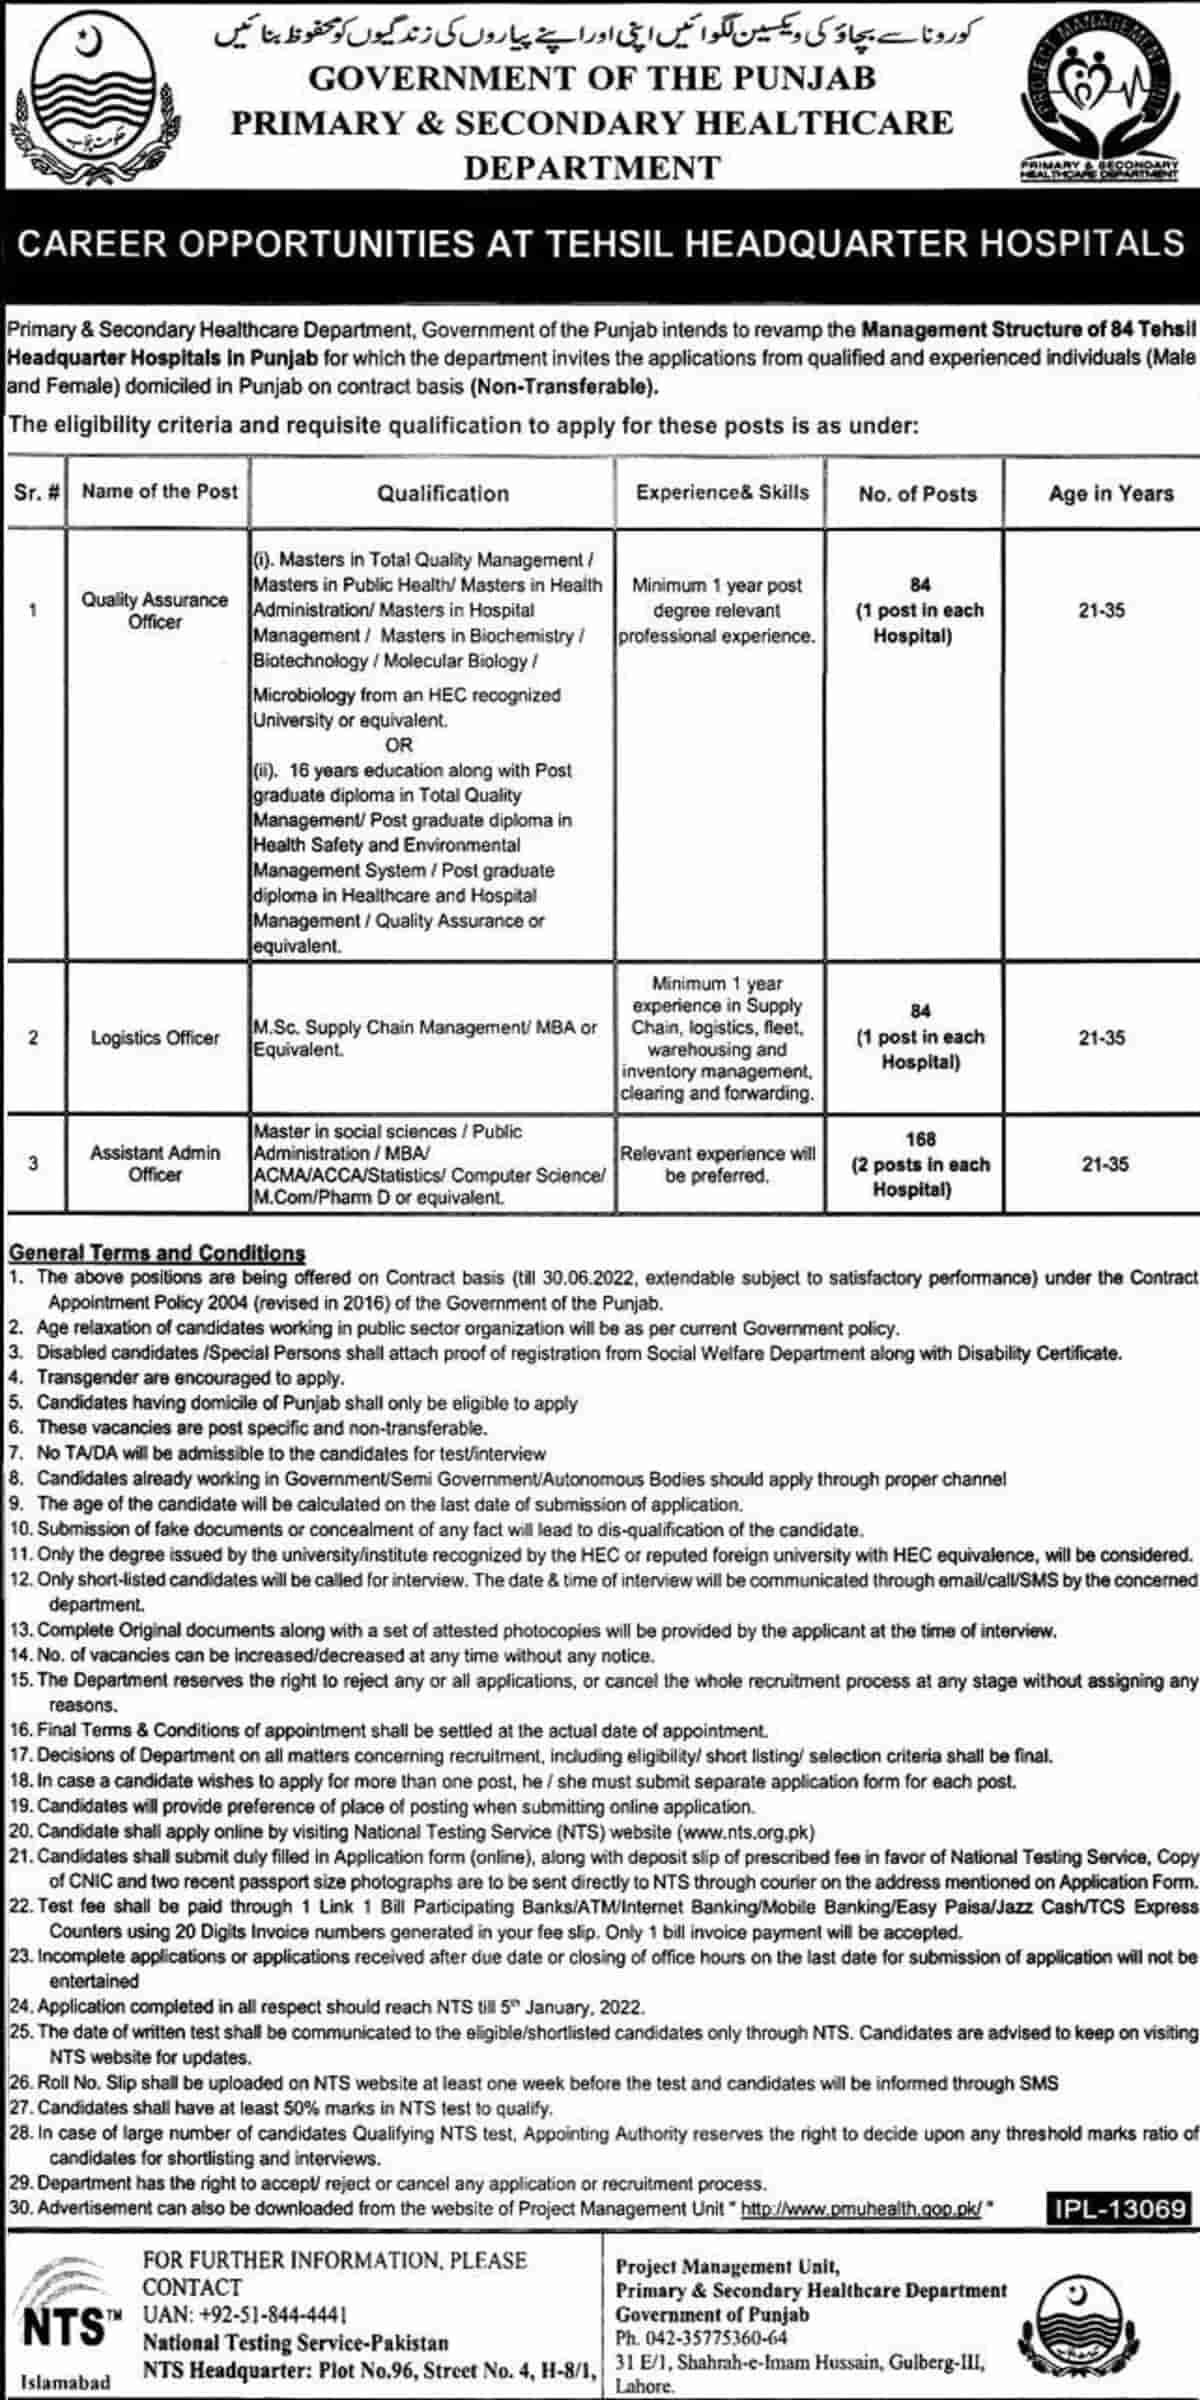 Primary and Secondary Healthcare Department Punjab Jobs 2021 Tehsil Headquarter Hospitals Latest 1